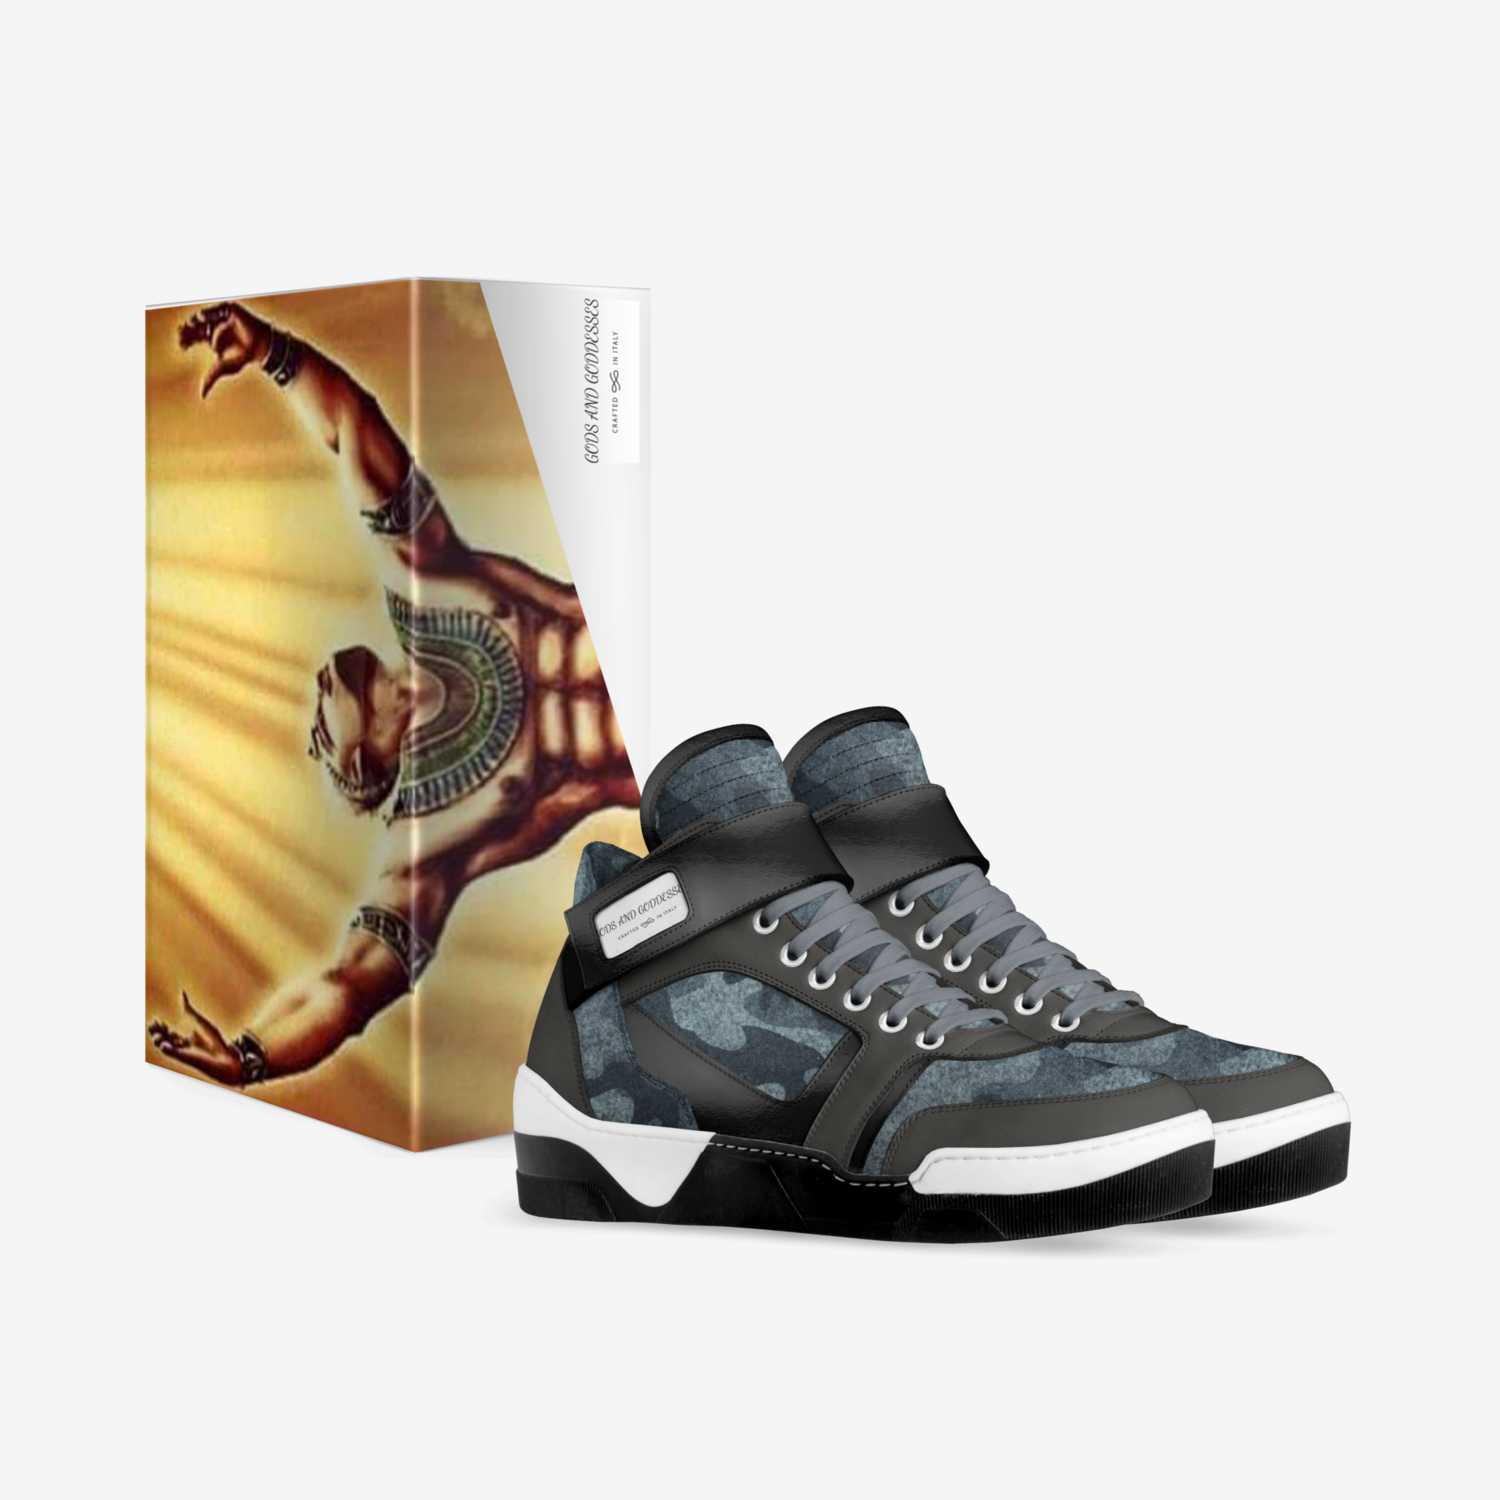 GODS AND GODDESSES custom made in Italy shoes by Tommy Petty | Box view